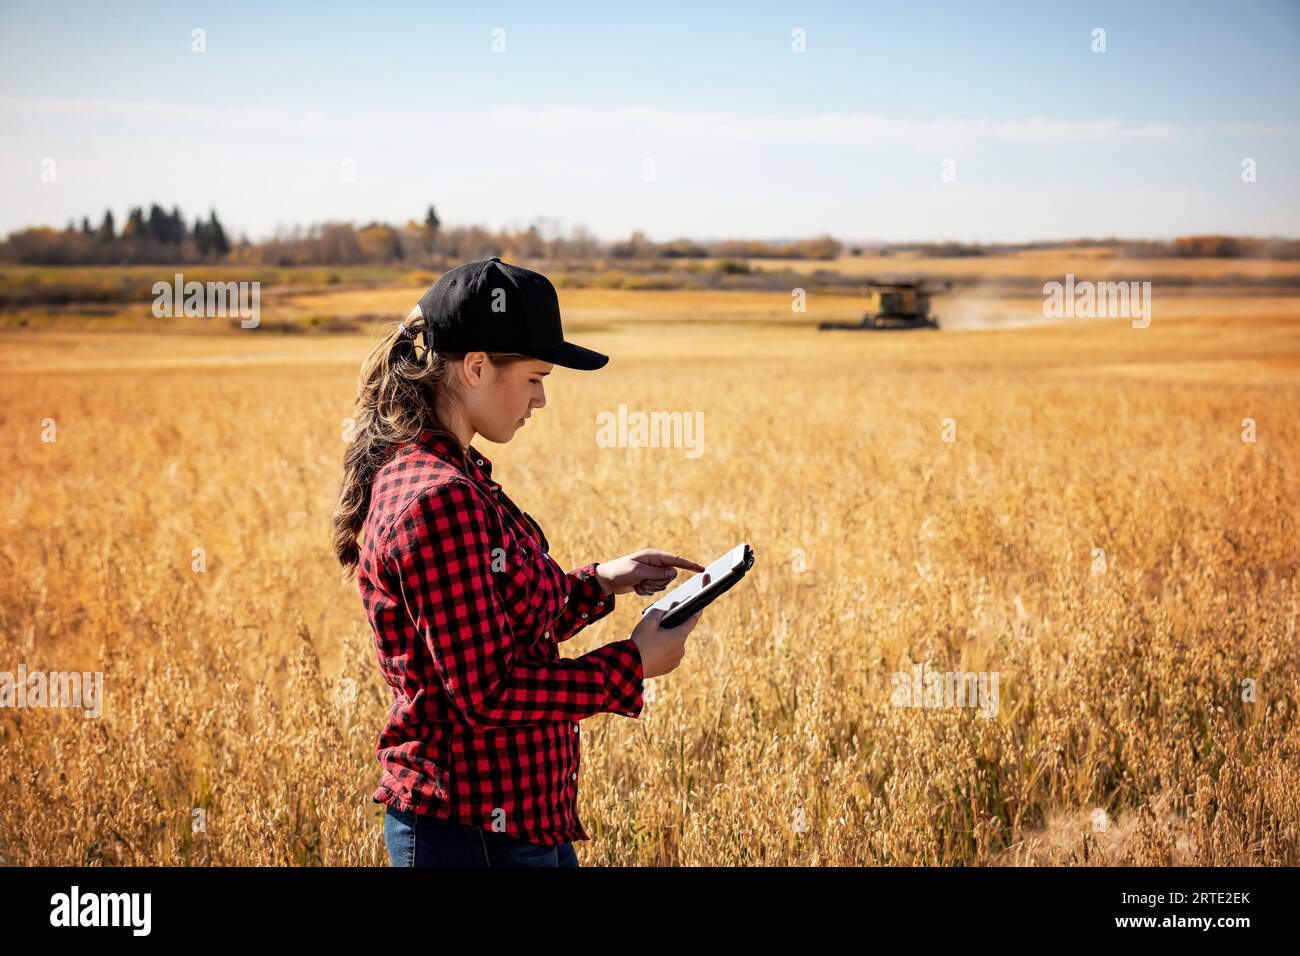 A young farm woman standing in a grain field at harvest time, using advanced agricultural software technologies on a pad, while a combine works in ... Stock Photo